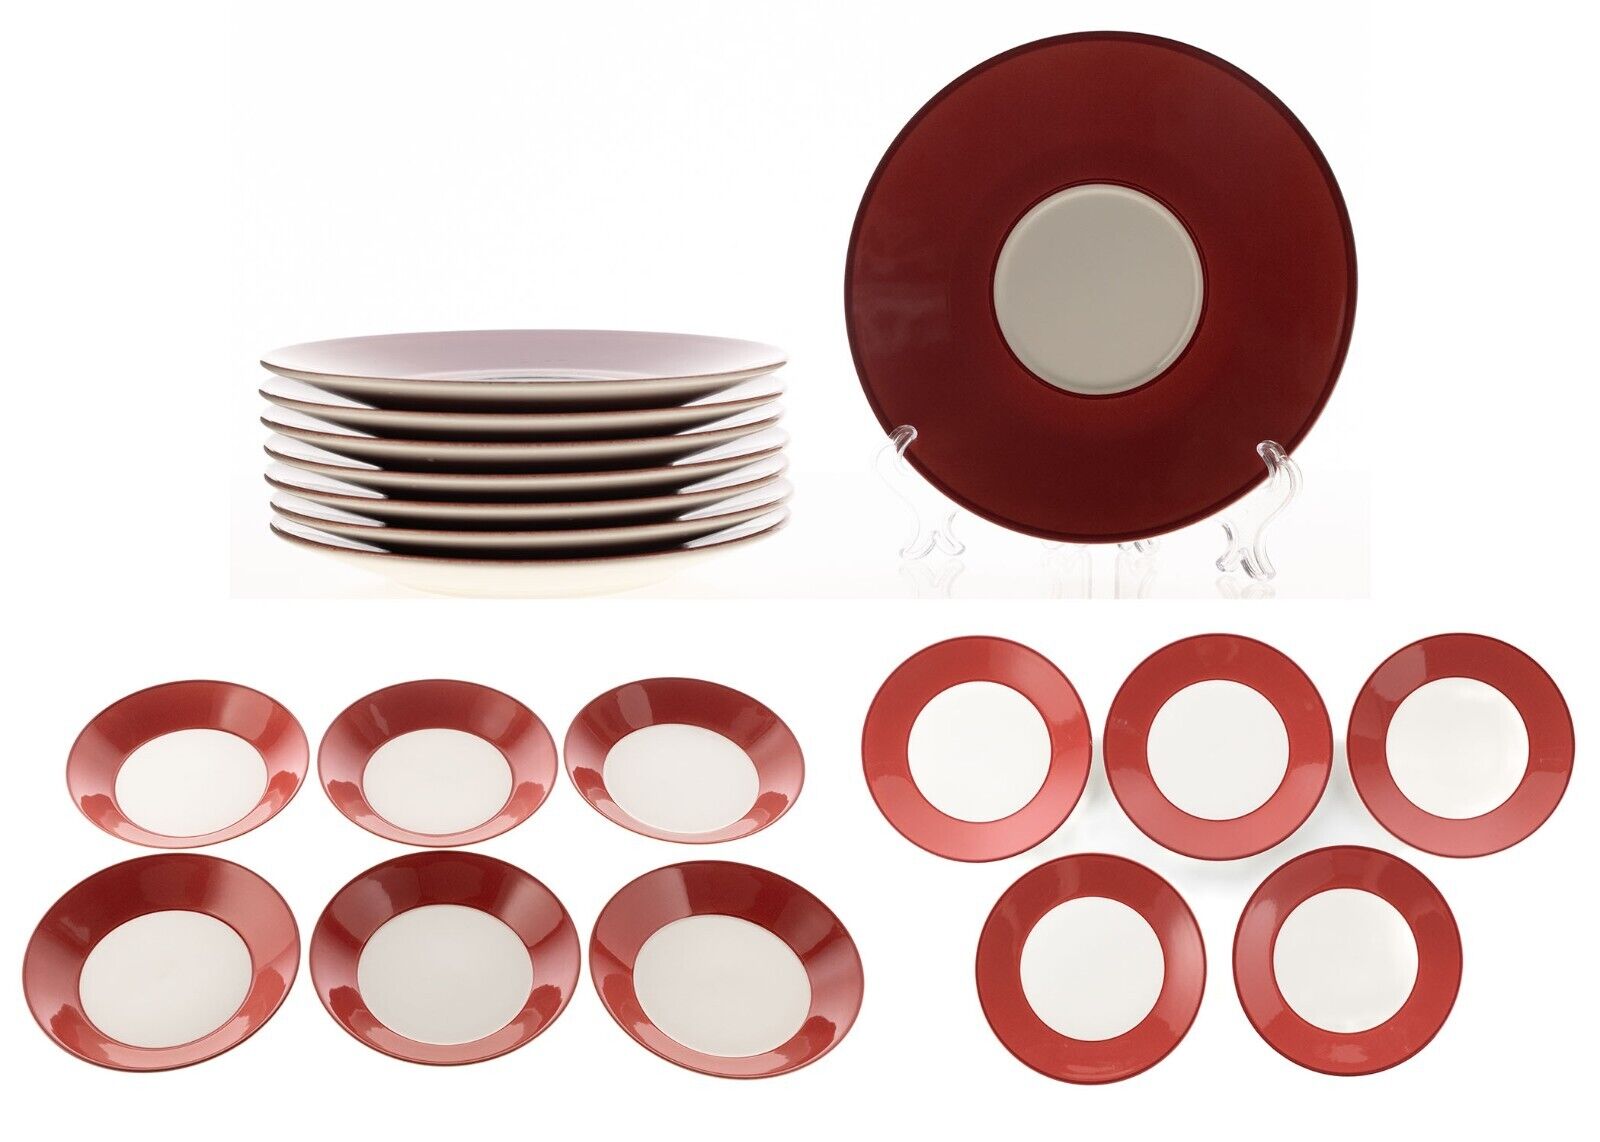 19pc Pagnossin Treviso Set Red Italy (8)7in Plates (6)8in Plates (5)8.5in Bowls